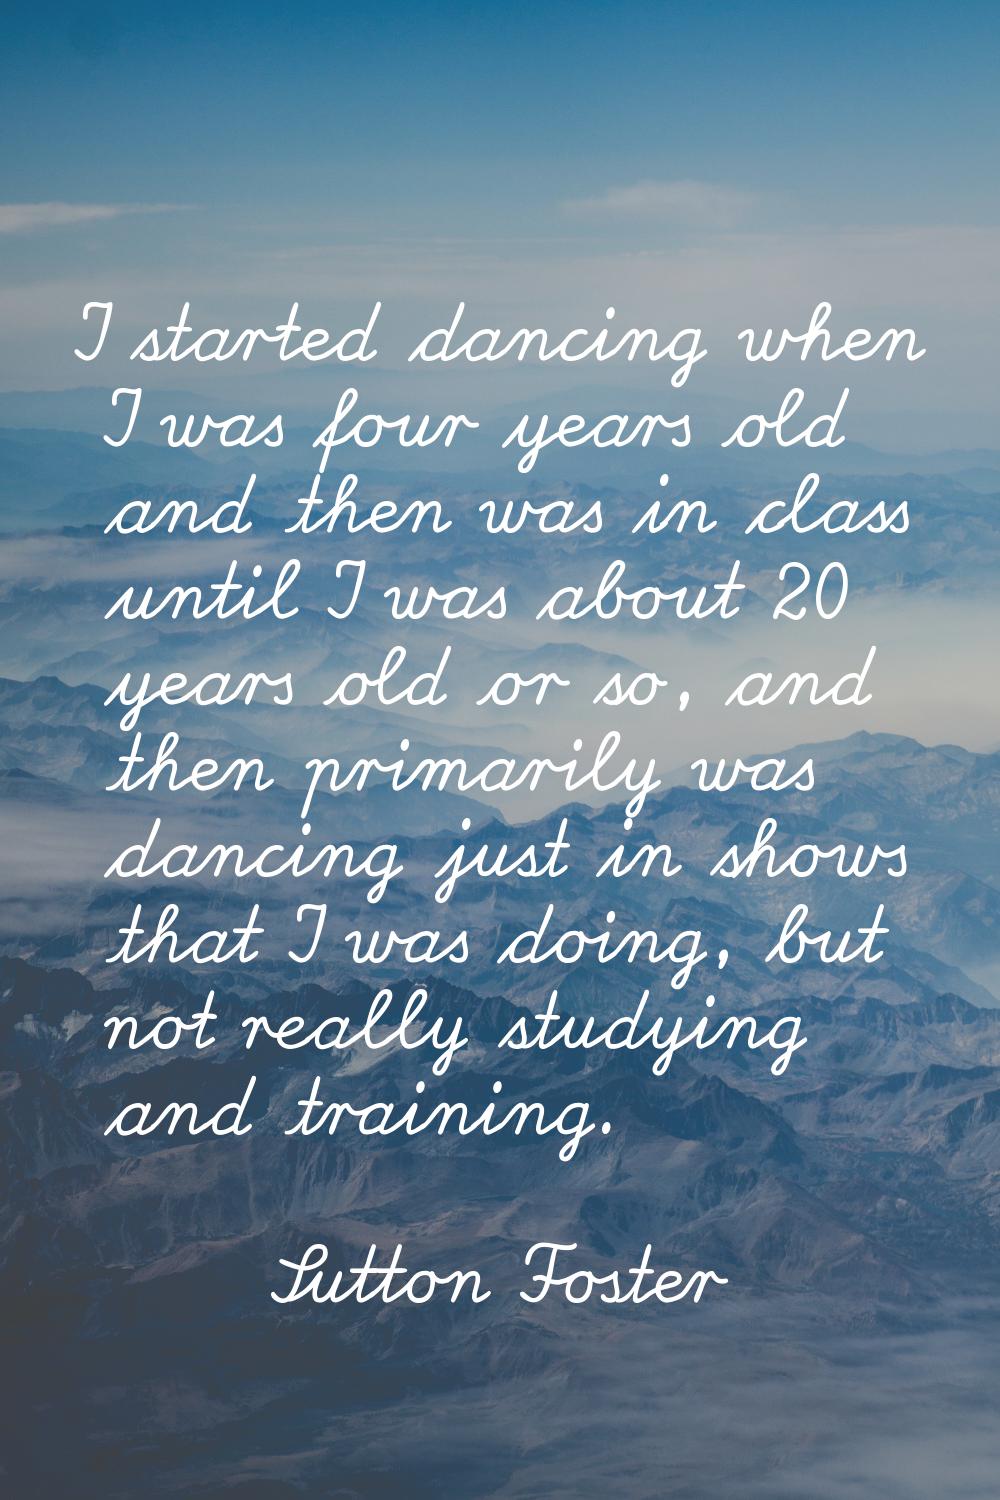 I started dancing when I was four years old and then was in class until I was about 20 years old or